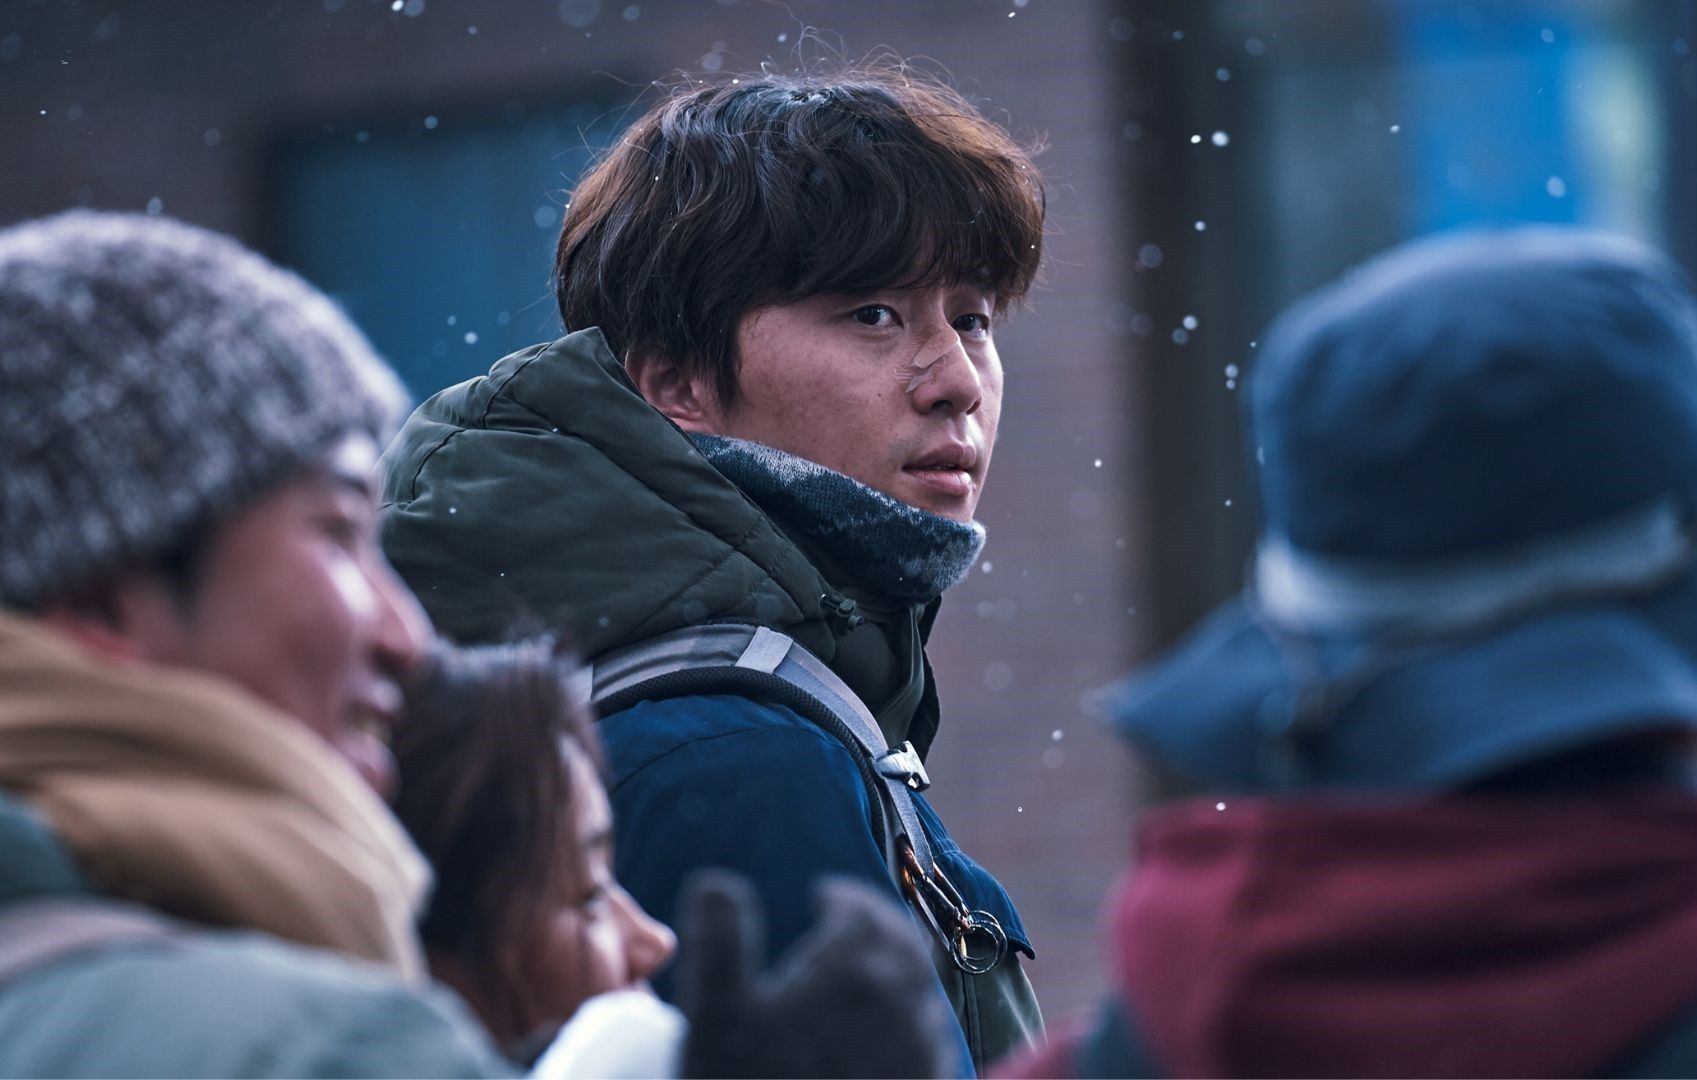 Korea’s Oscars entry ‘Concrete Utopia’ with Park Seo Joon now available for streaming